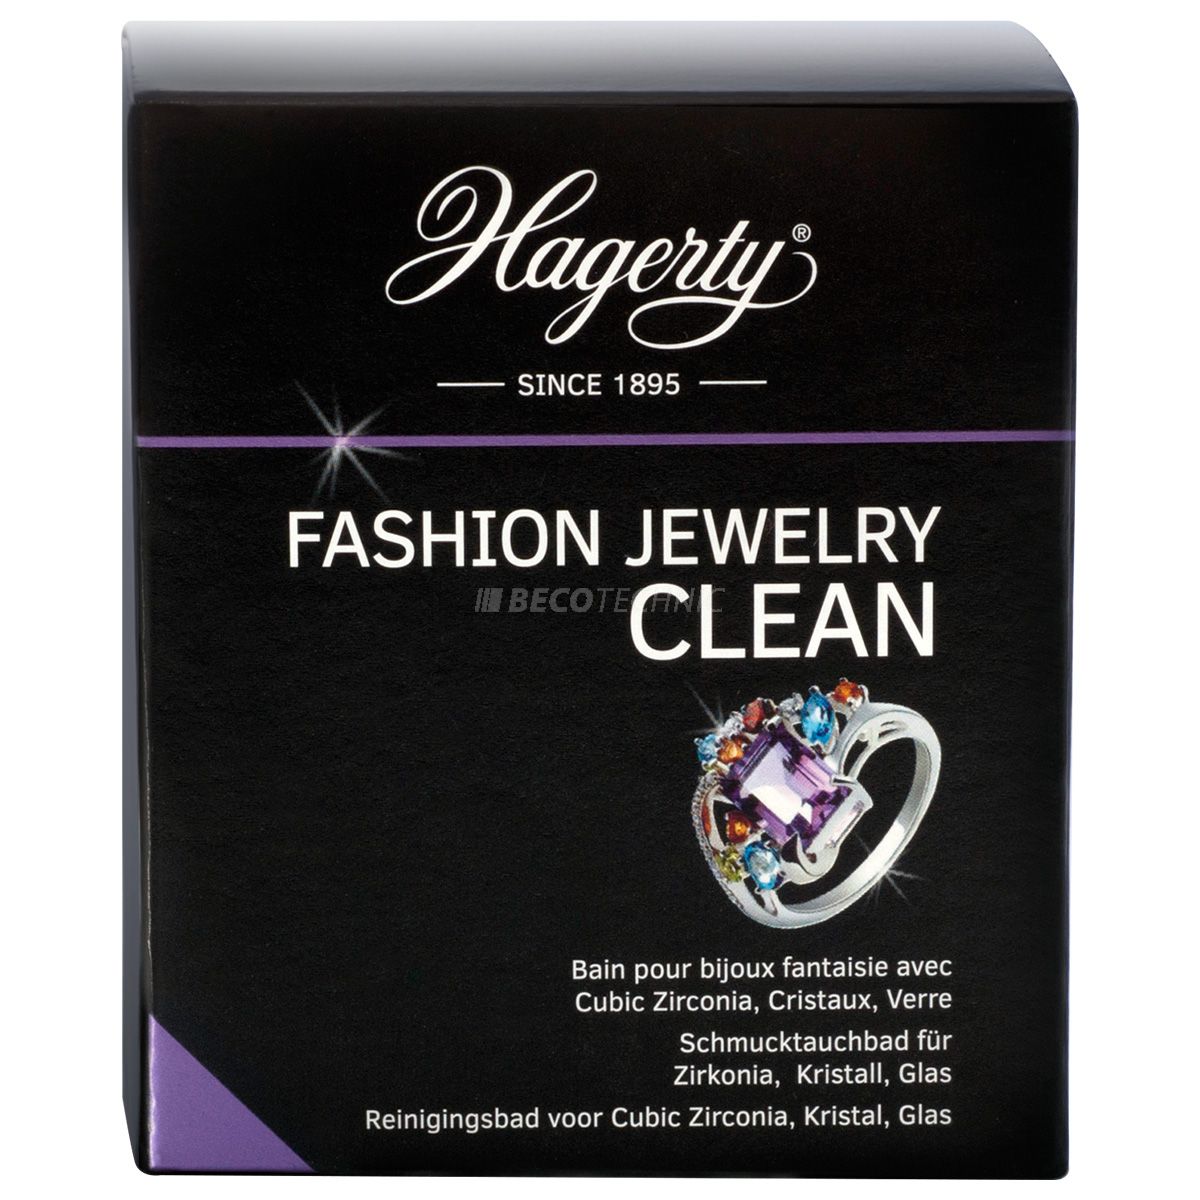 Hagerty Fashion Jewelry Clean, bain d'immersion pour bijoux, 170 ml